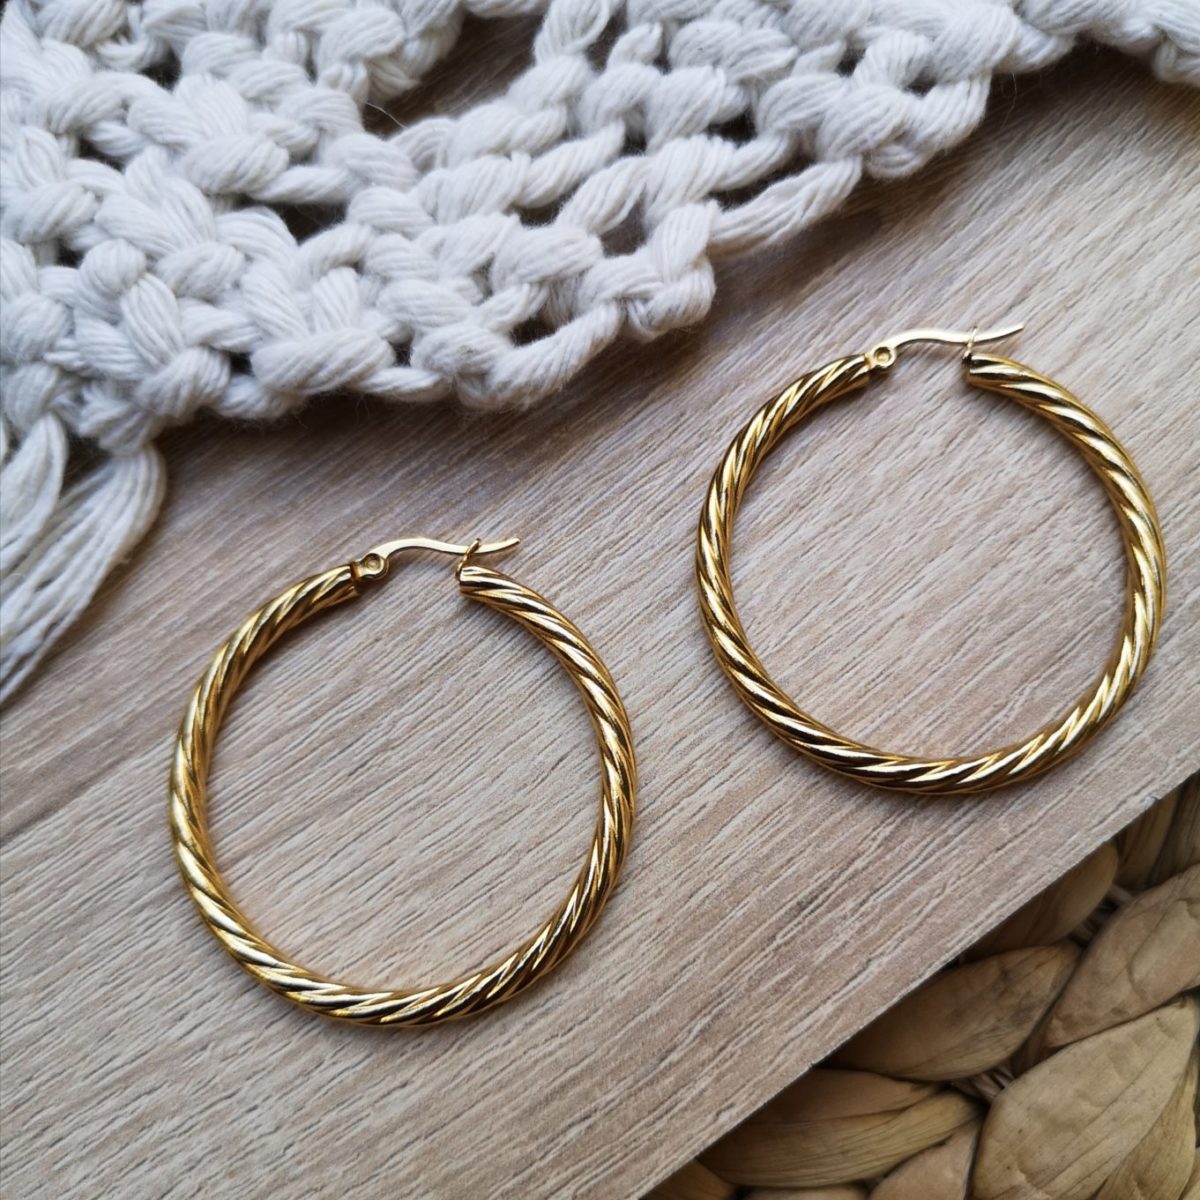 twisted hoops